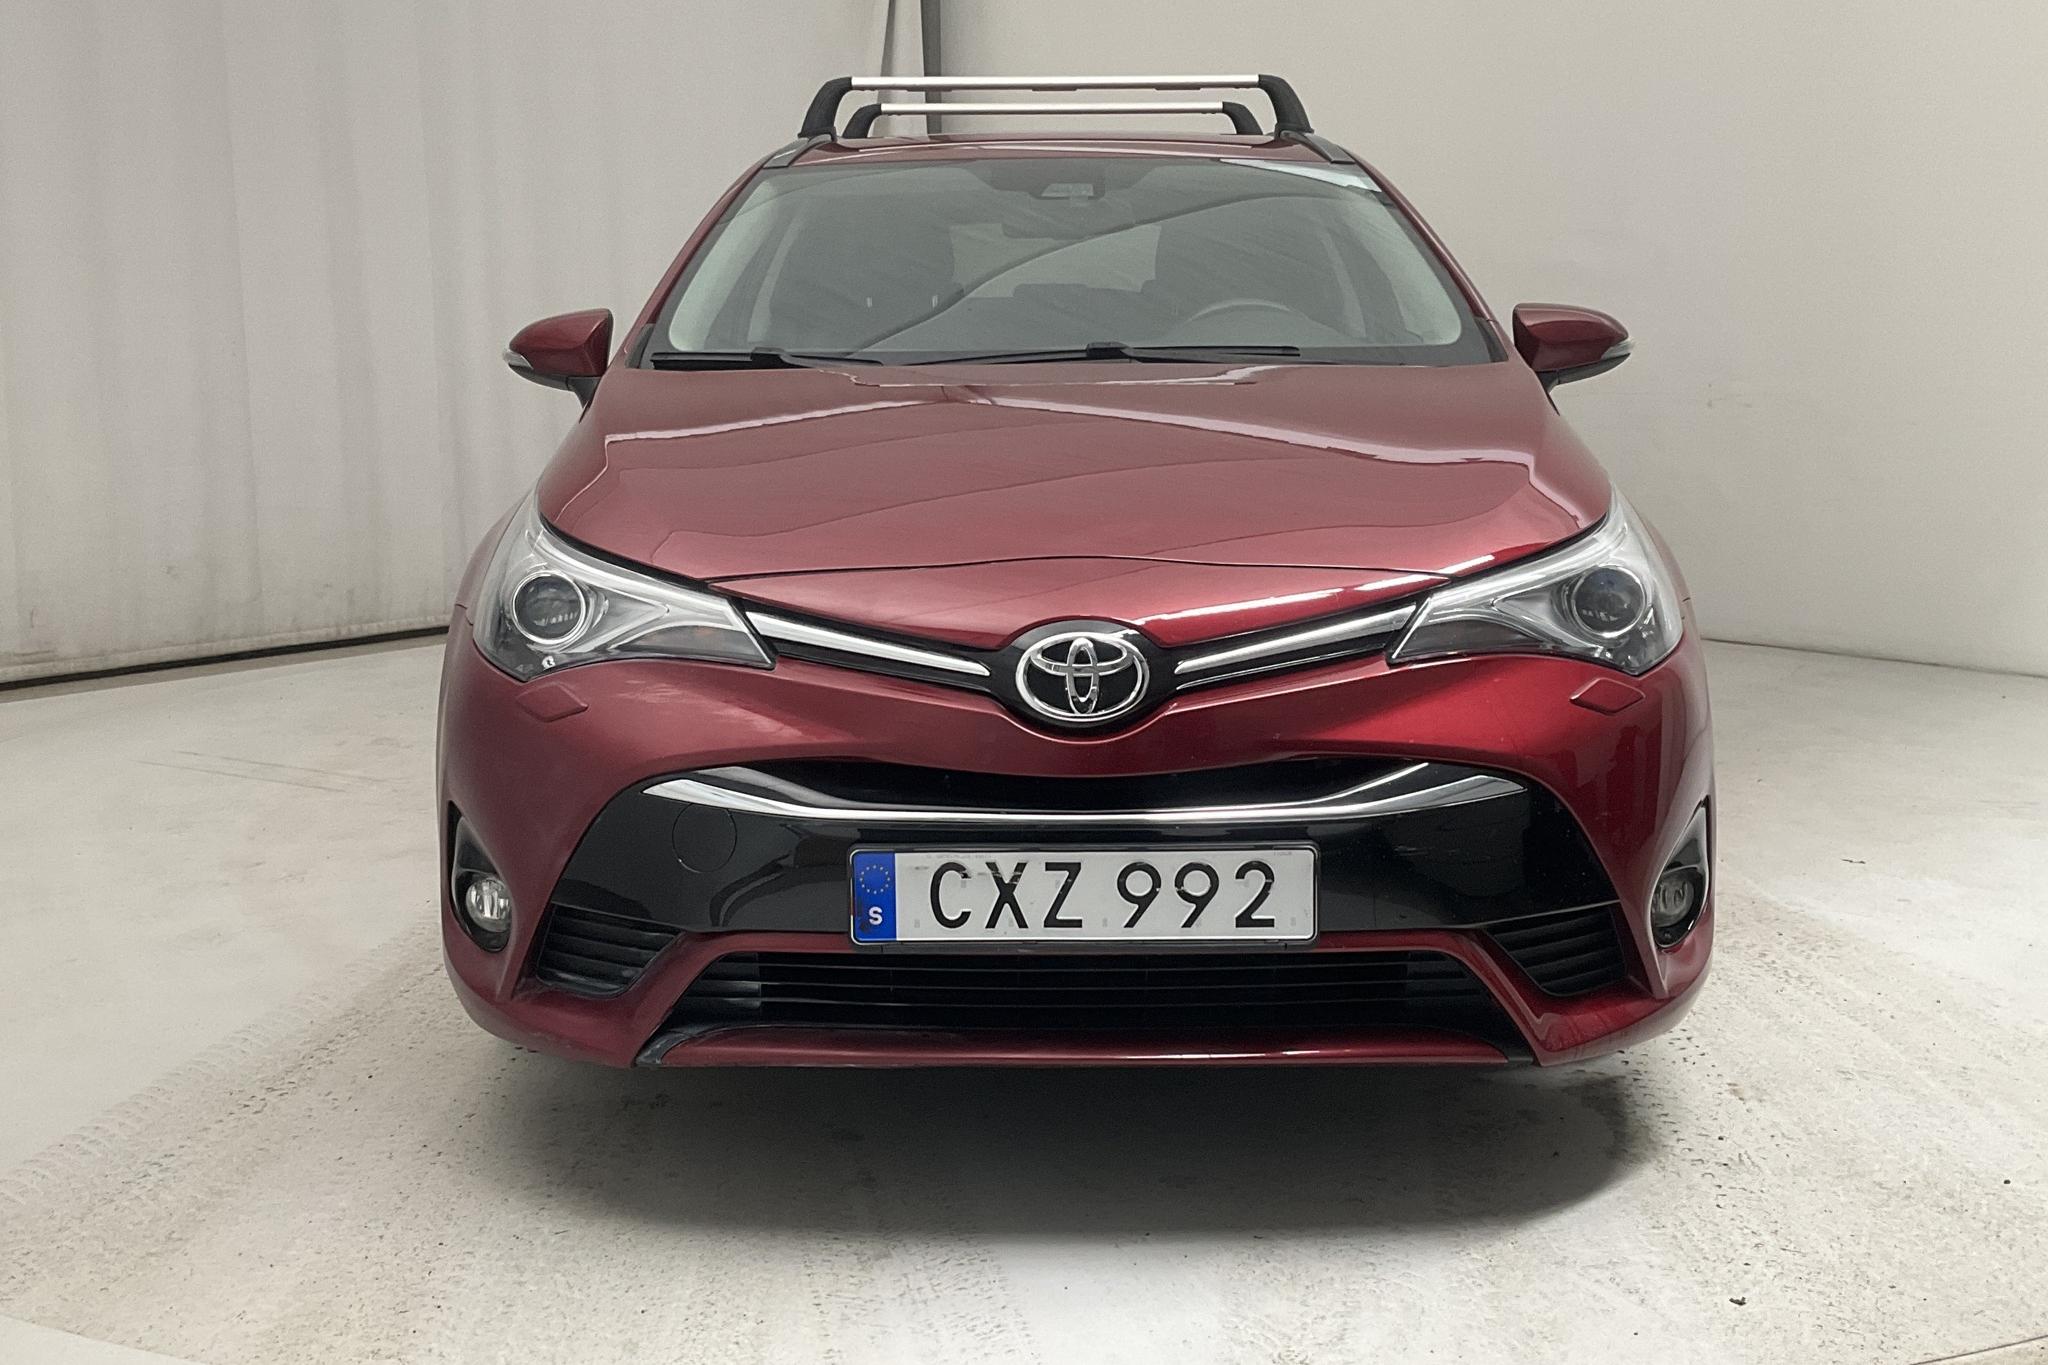 Toyota Avensis 1.8 Valvematic (147hk) - 68 790 km - Automatic - red - 2017